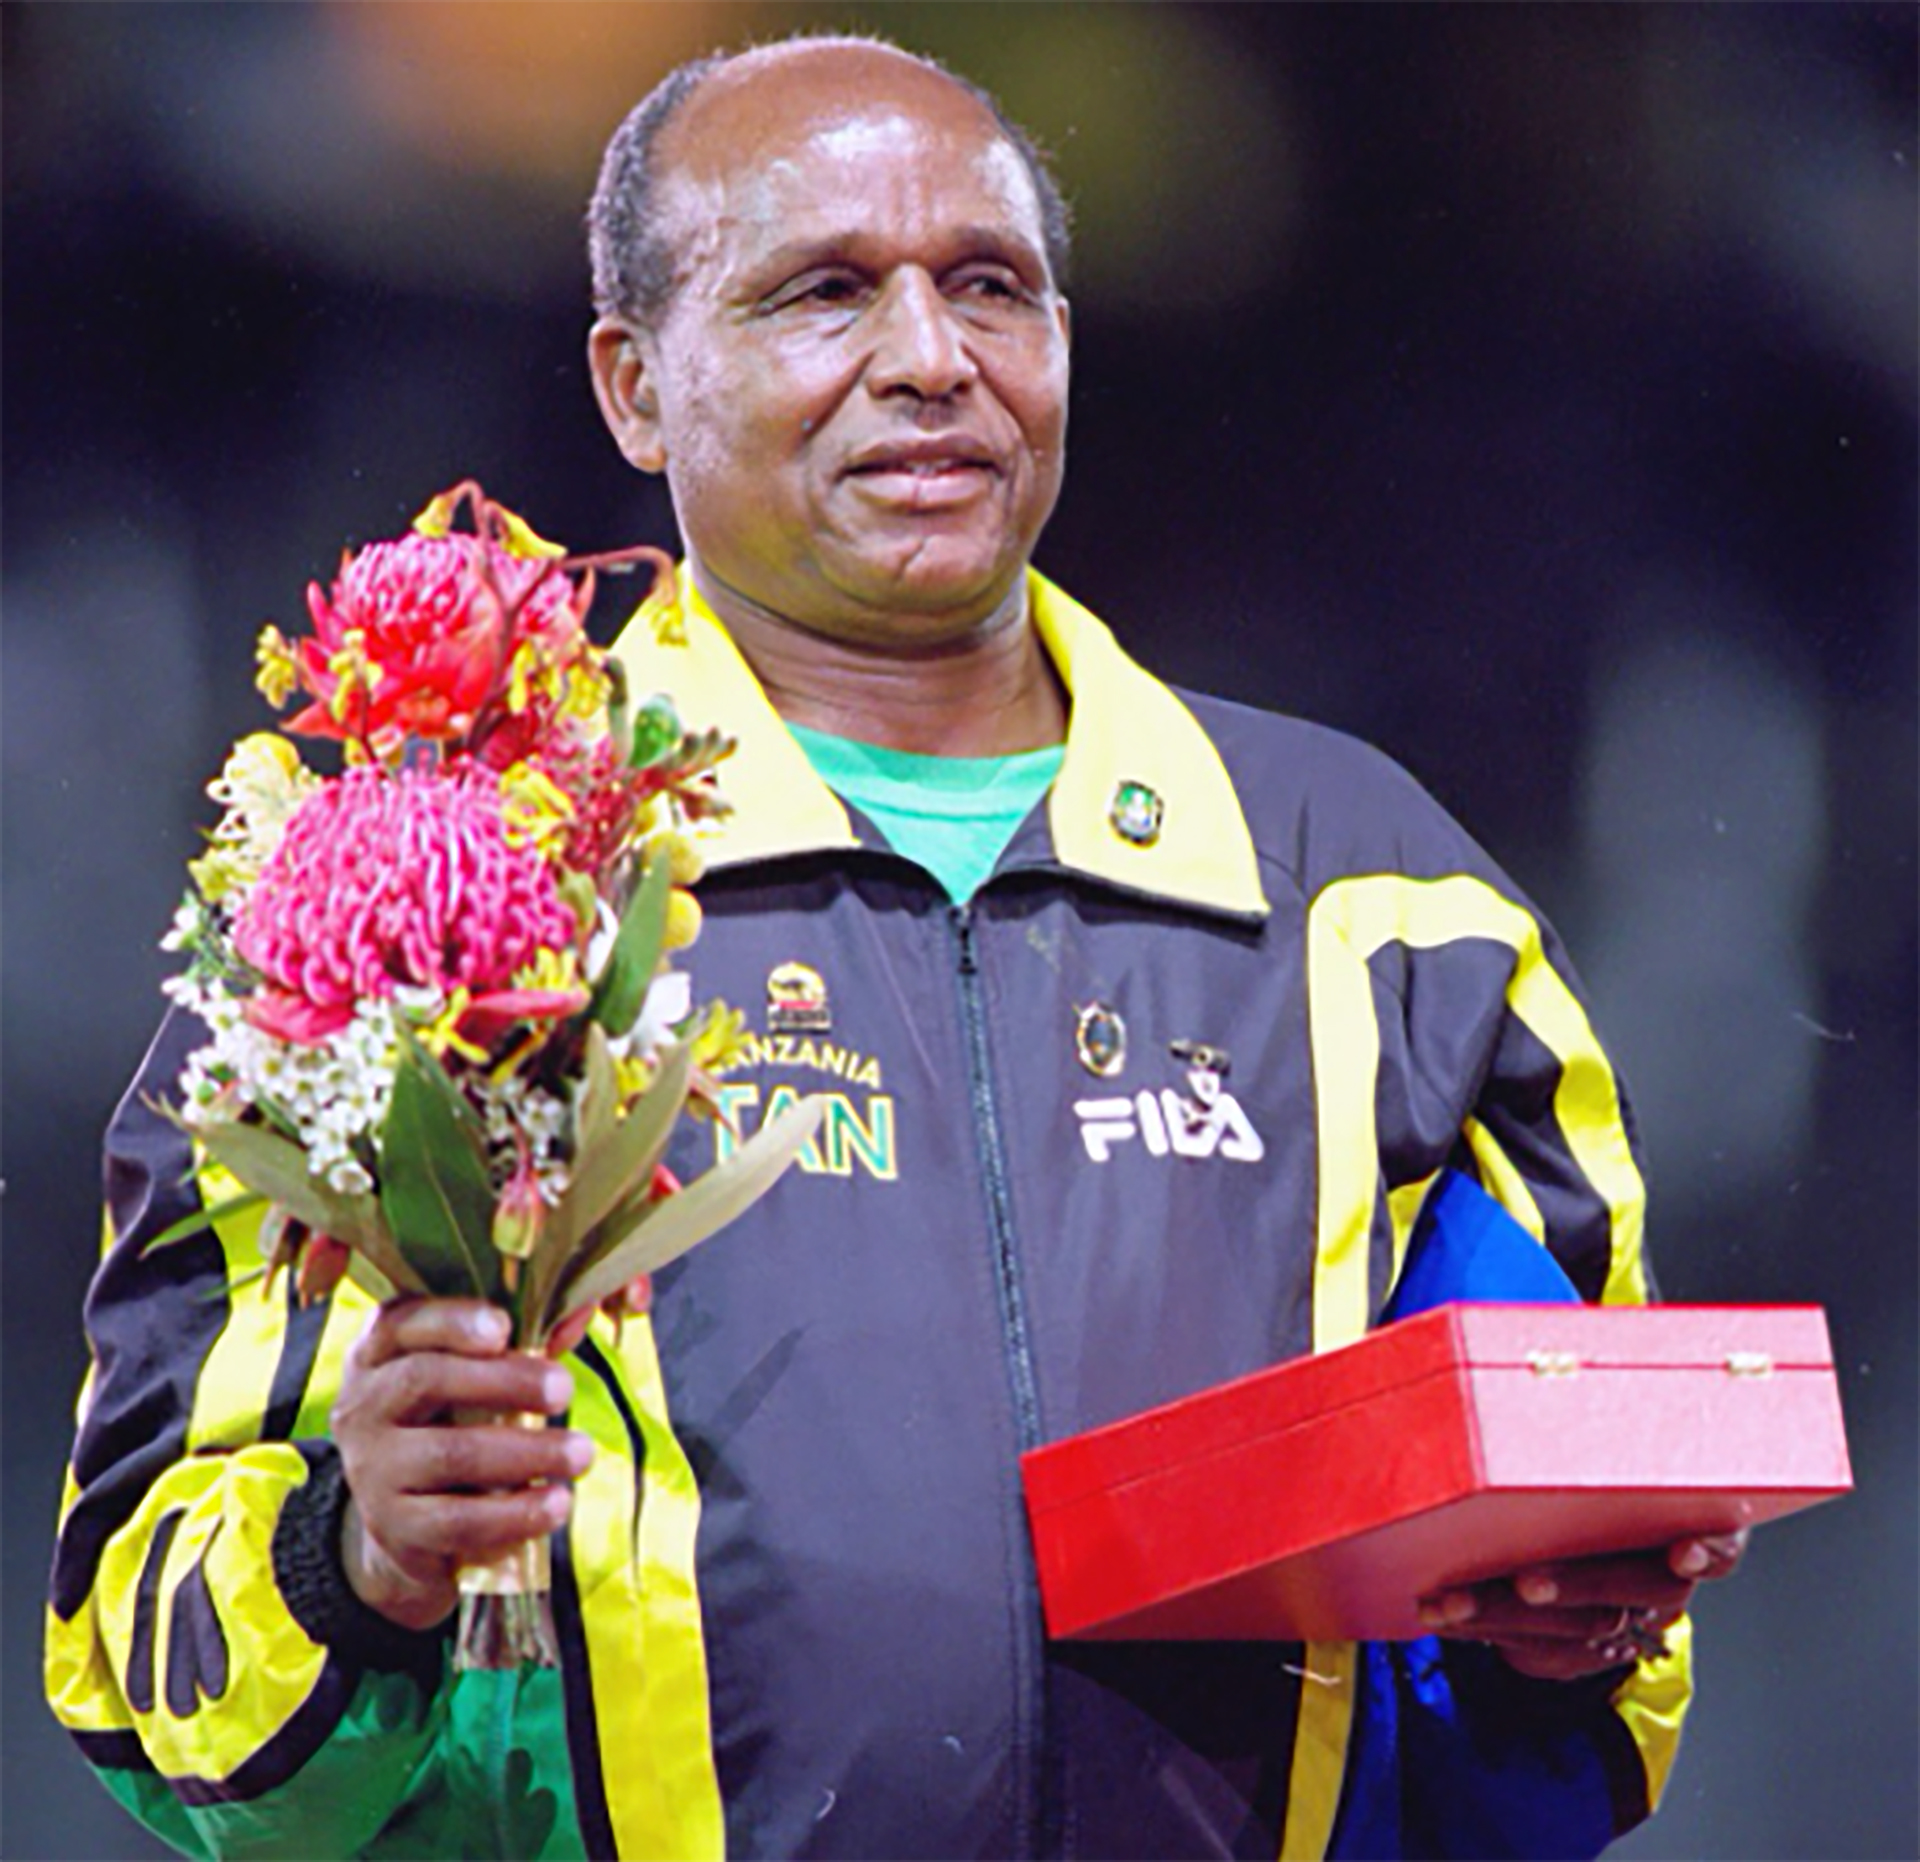 Joseph Stephen Akhwari was invited and received recognition at the 2000 Sydney Olympic Games